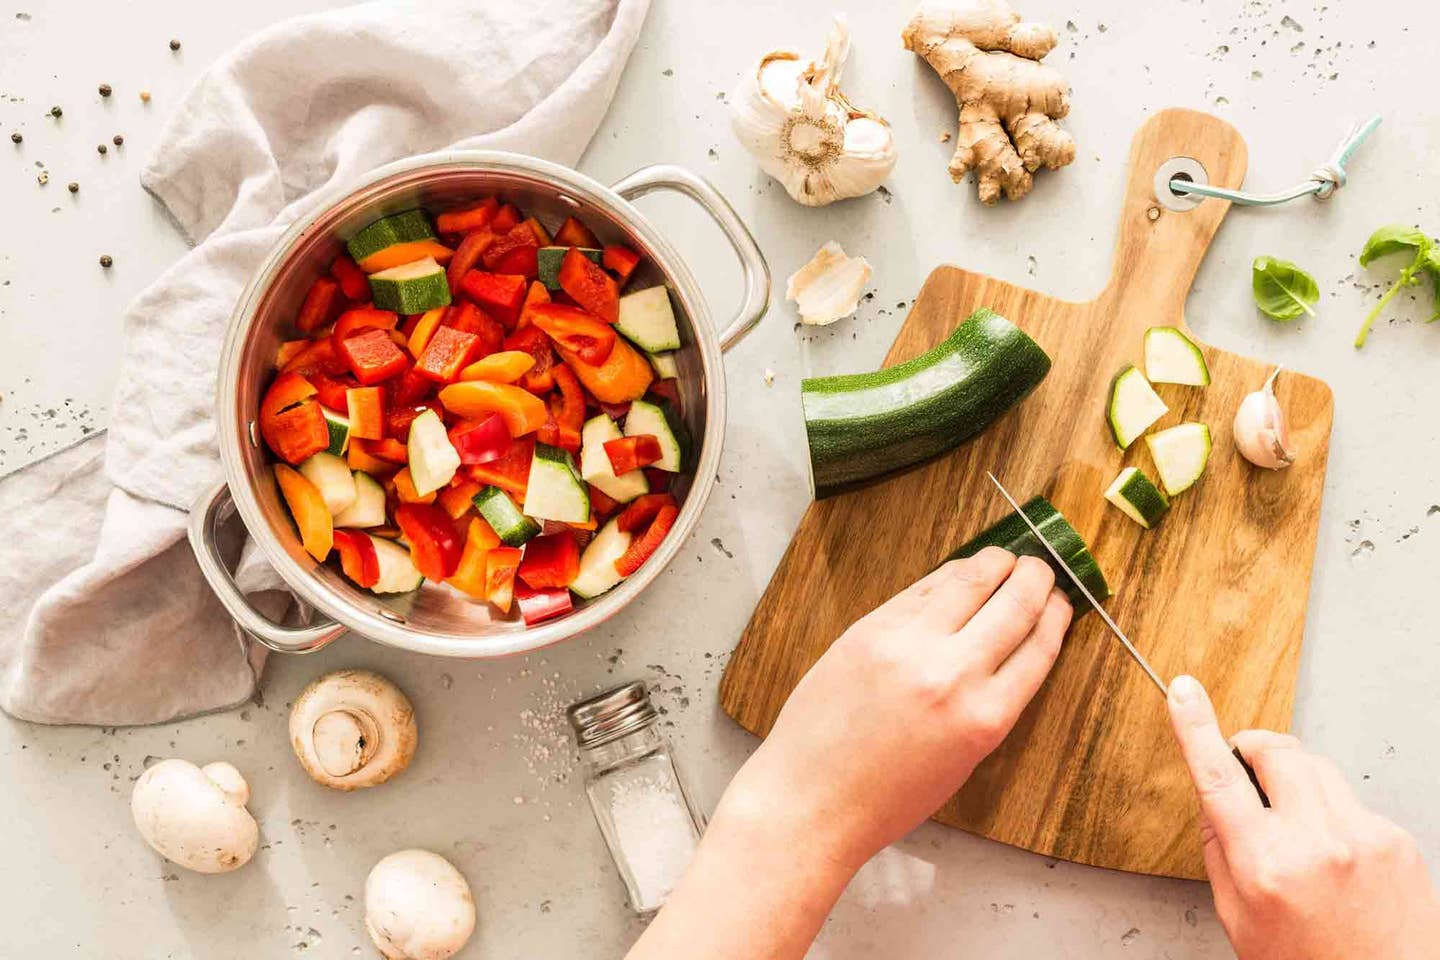 Woman prepping vegetables, slicing a zucchini on a cutting board, with a bowl of chopped bell peppers, tomatoes, zucchini to the side